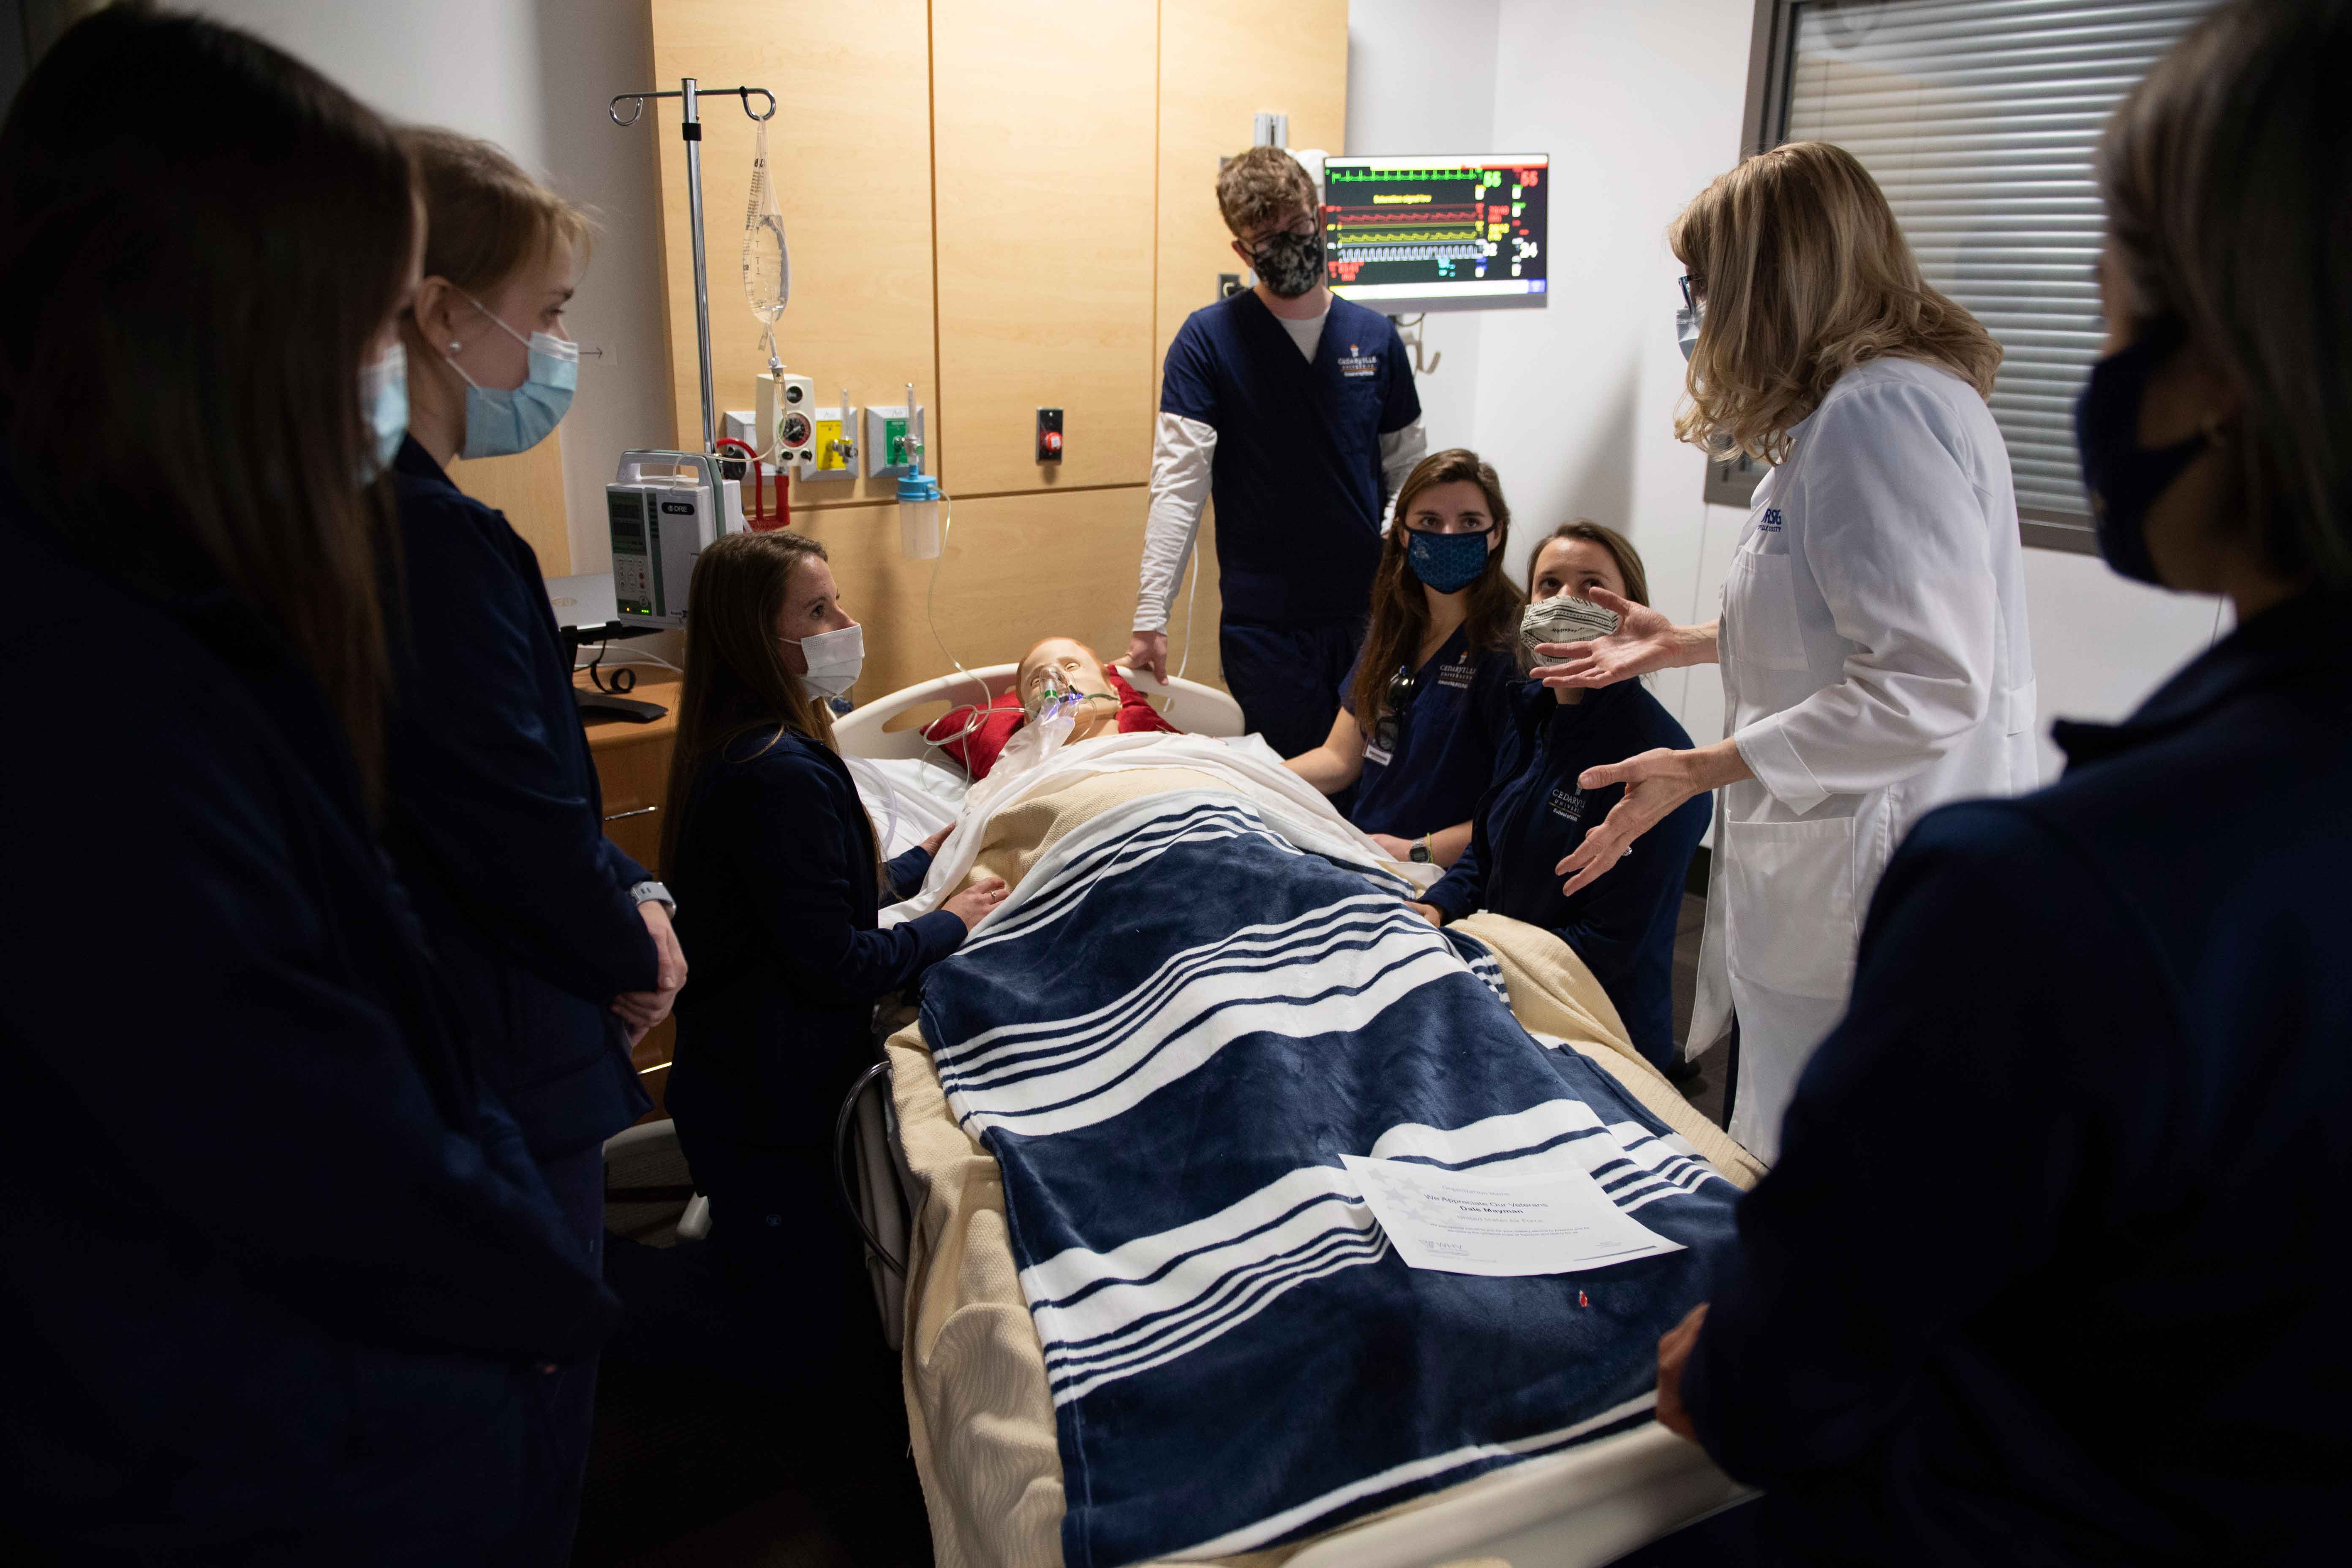 Dr. Beth Delaney from the Cedarville University School of Nursing, gives instructions to students participating in the simulator training